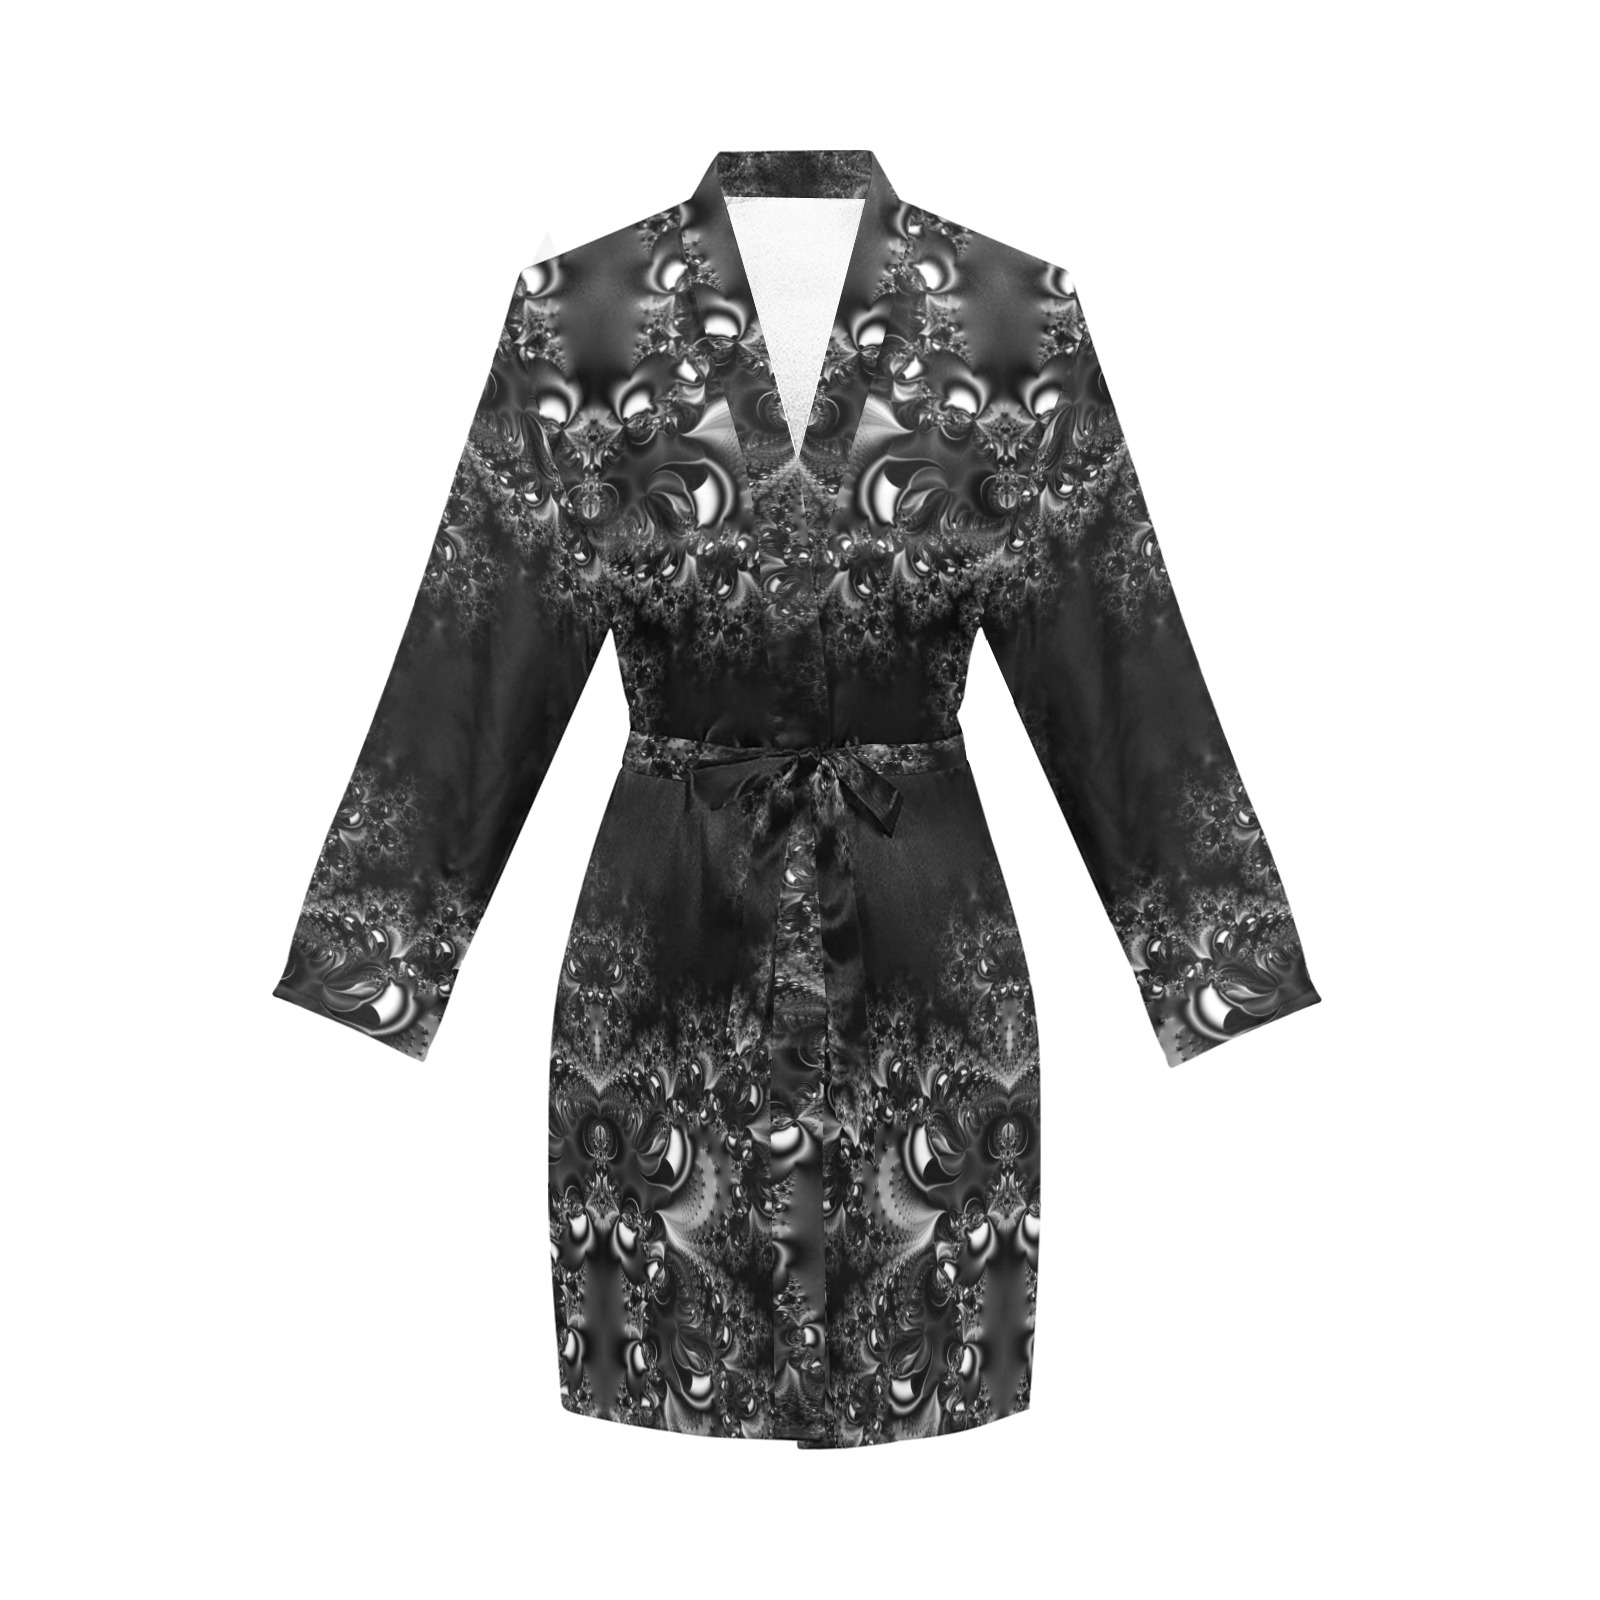 Frost at Midnight Fractal Women's Long Sleeve Belted Night Robe